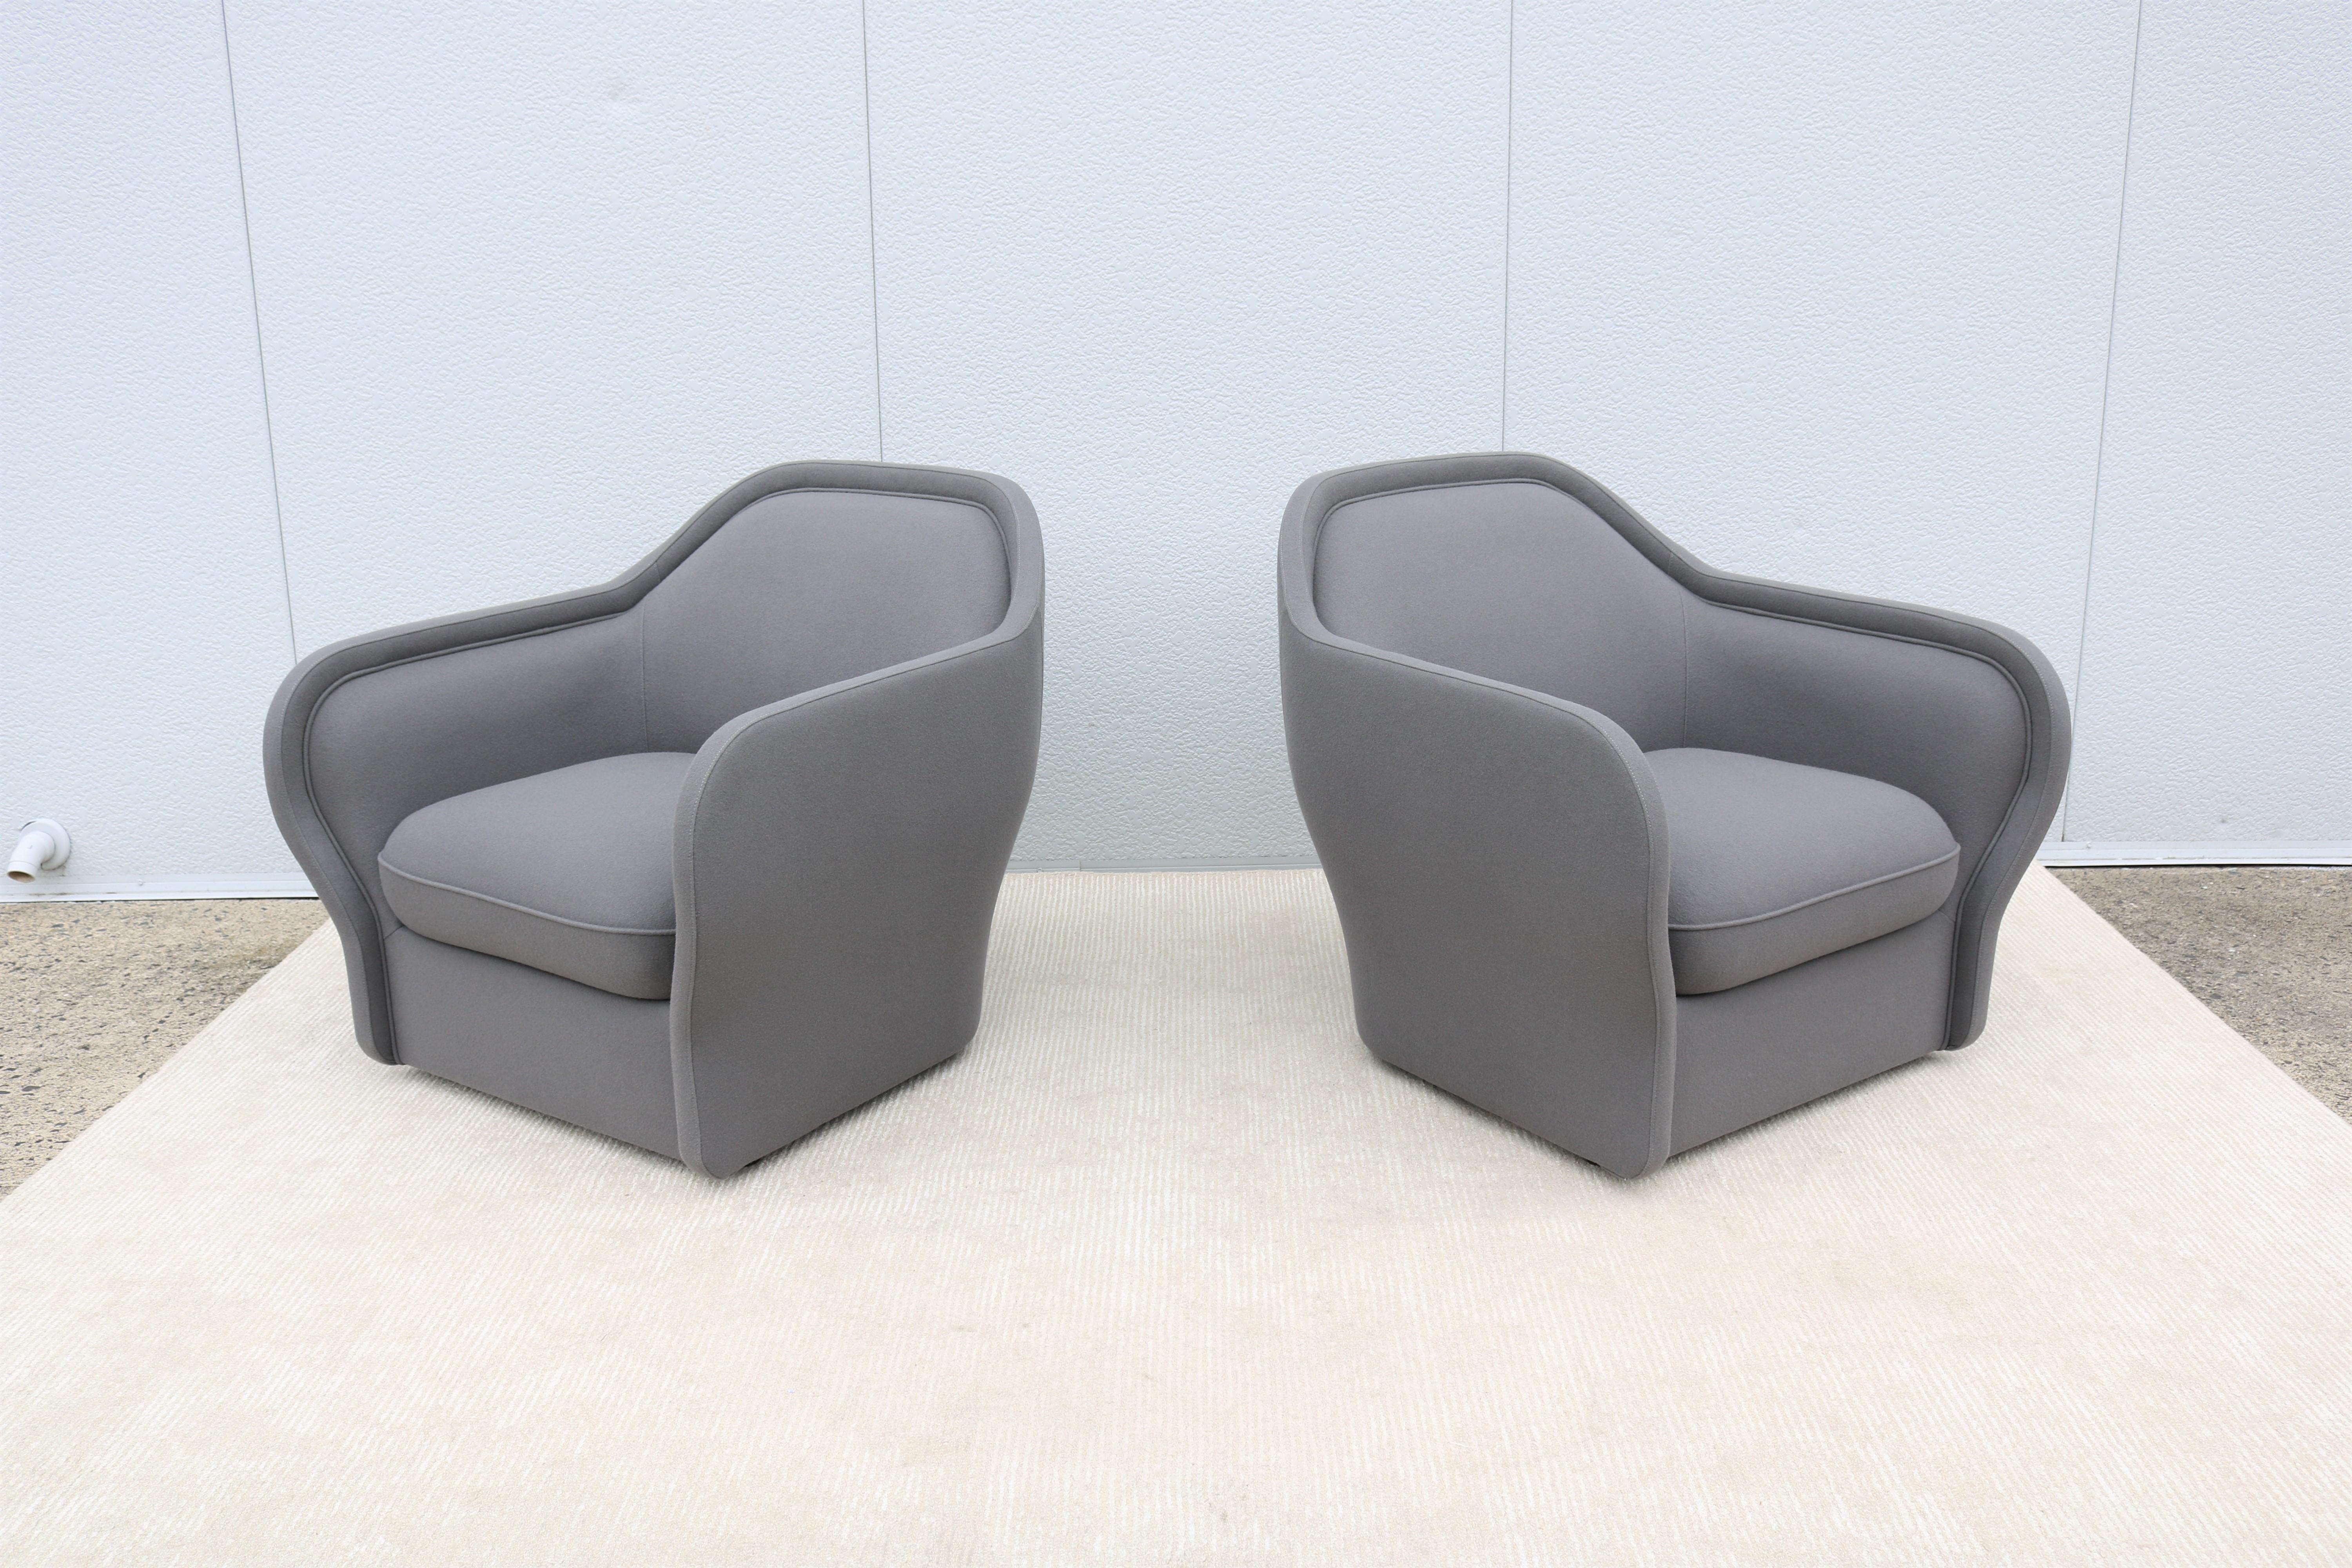 Carved Modern Jaime Hayon for Bernhardt Design Bardot Gray Lounge Chairs, a Pair